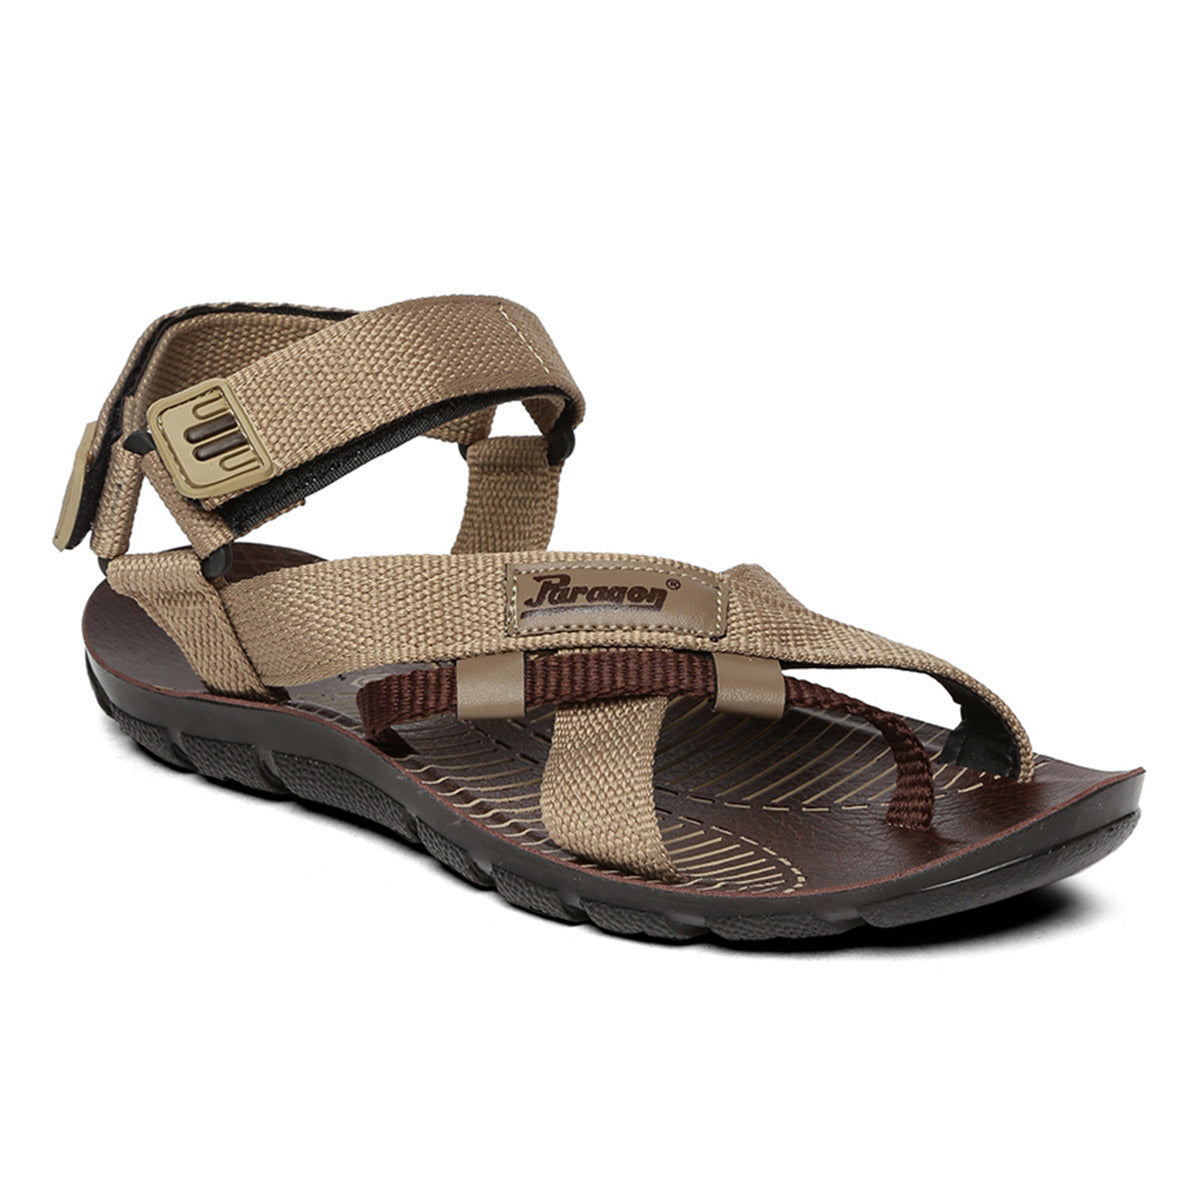 Paragon PU8910G Men Stylish Sandals | Comfortable Sandals for Daily Outdoor Use | Casual Formal Sandals with Cushioned Soles